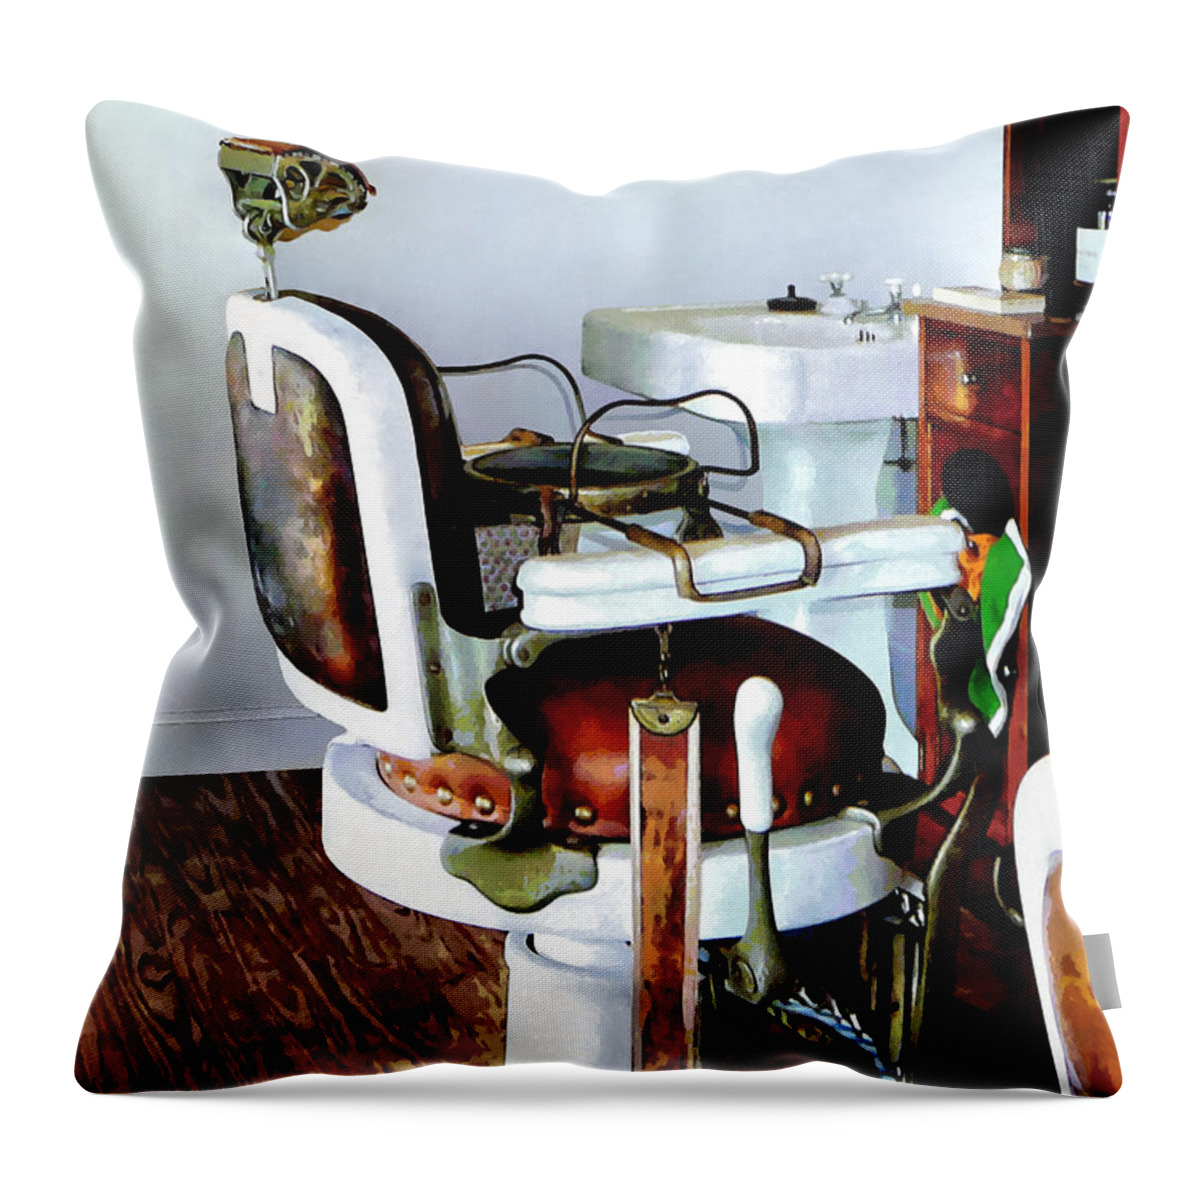 Barber Throw Pillow featuring the photograph Barber Chair by Susan Savad